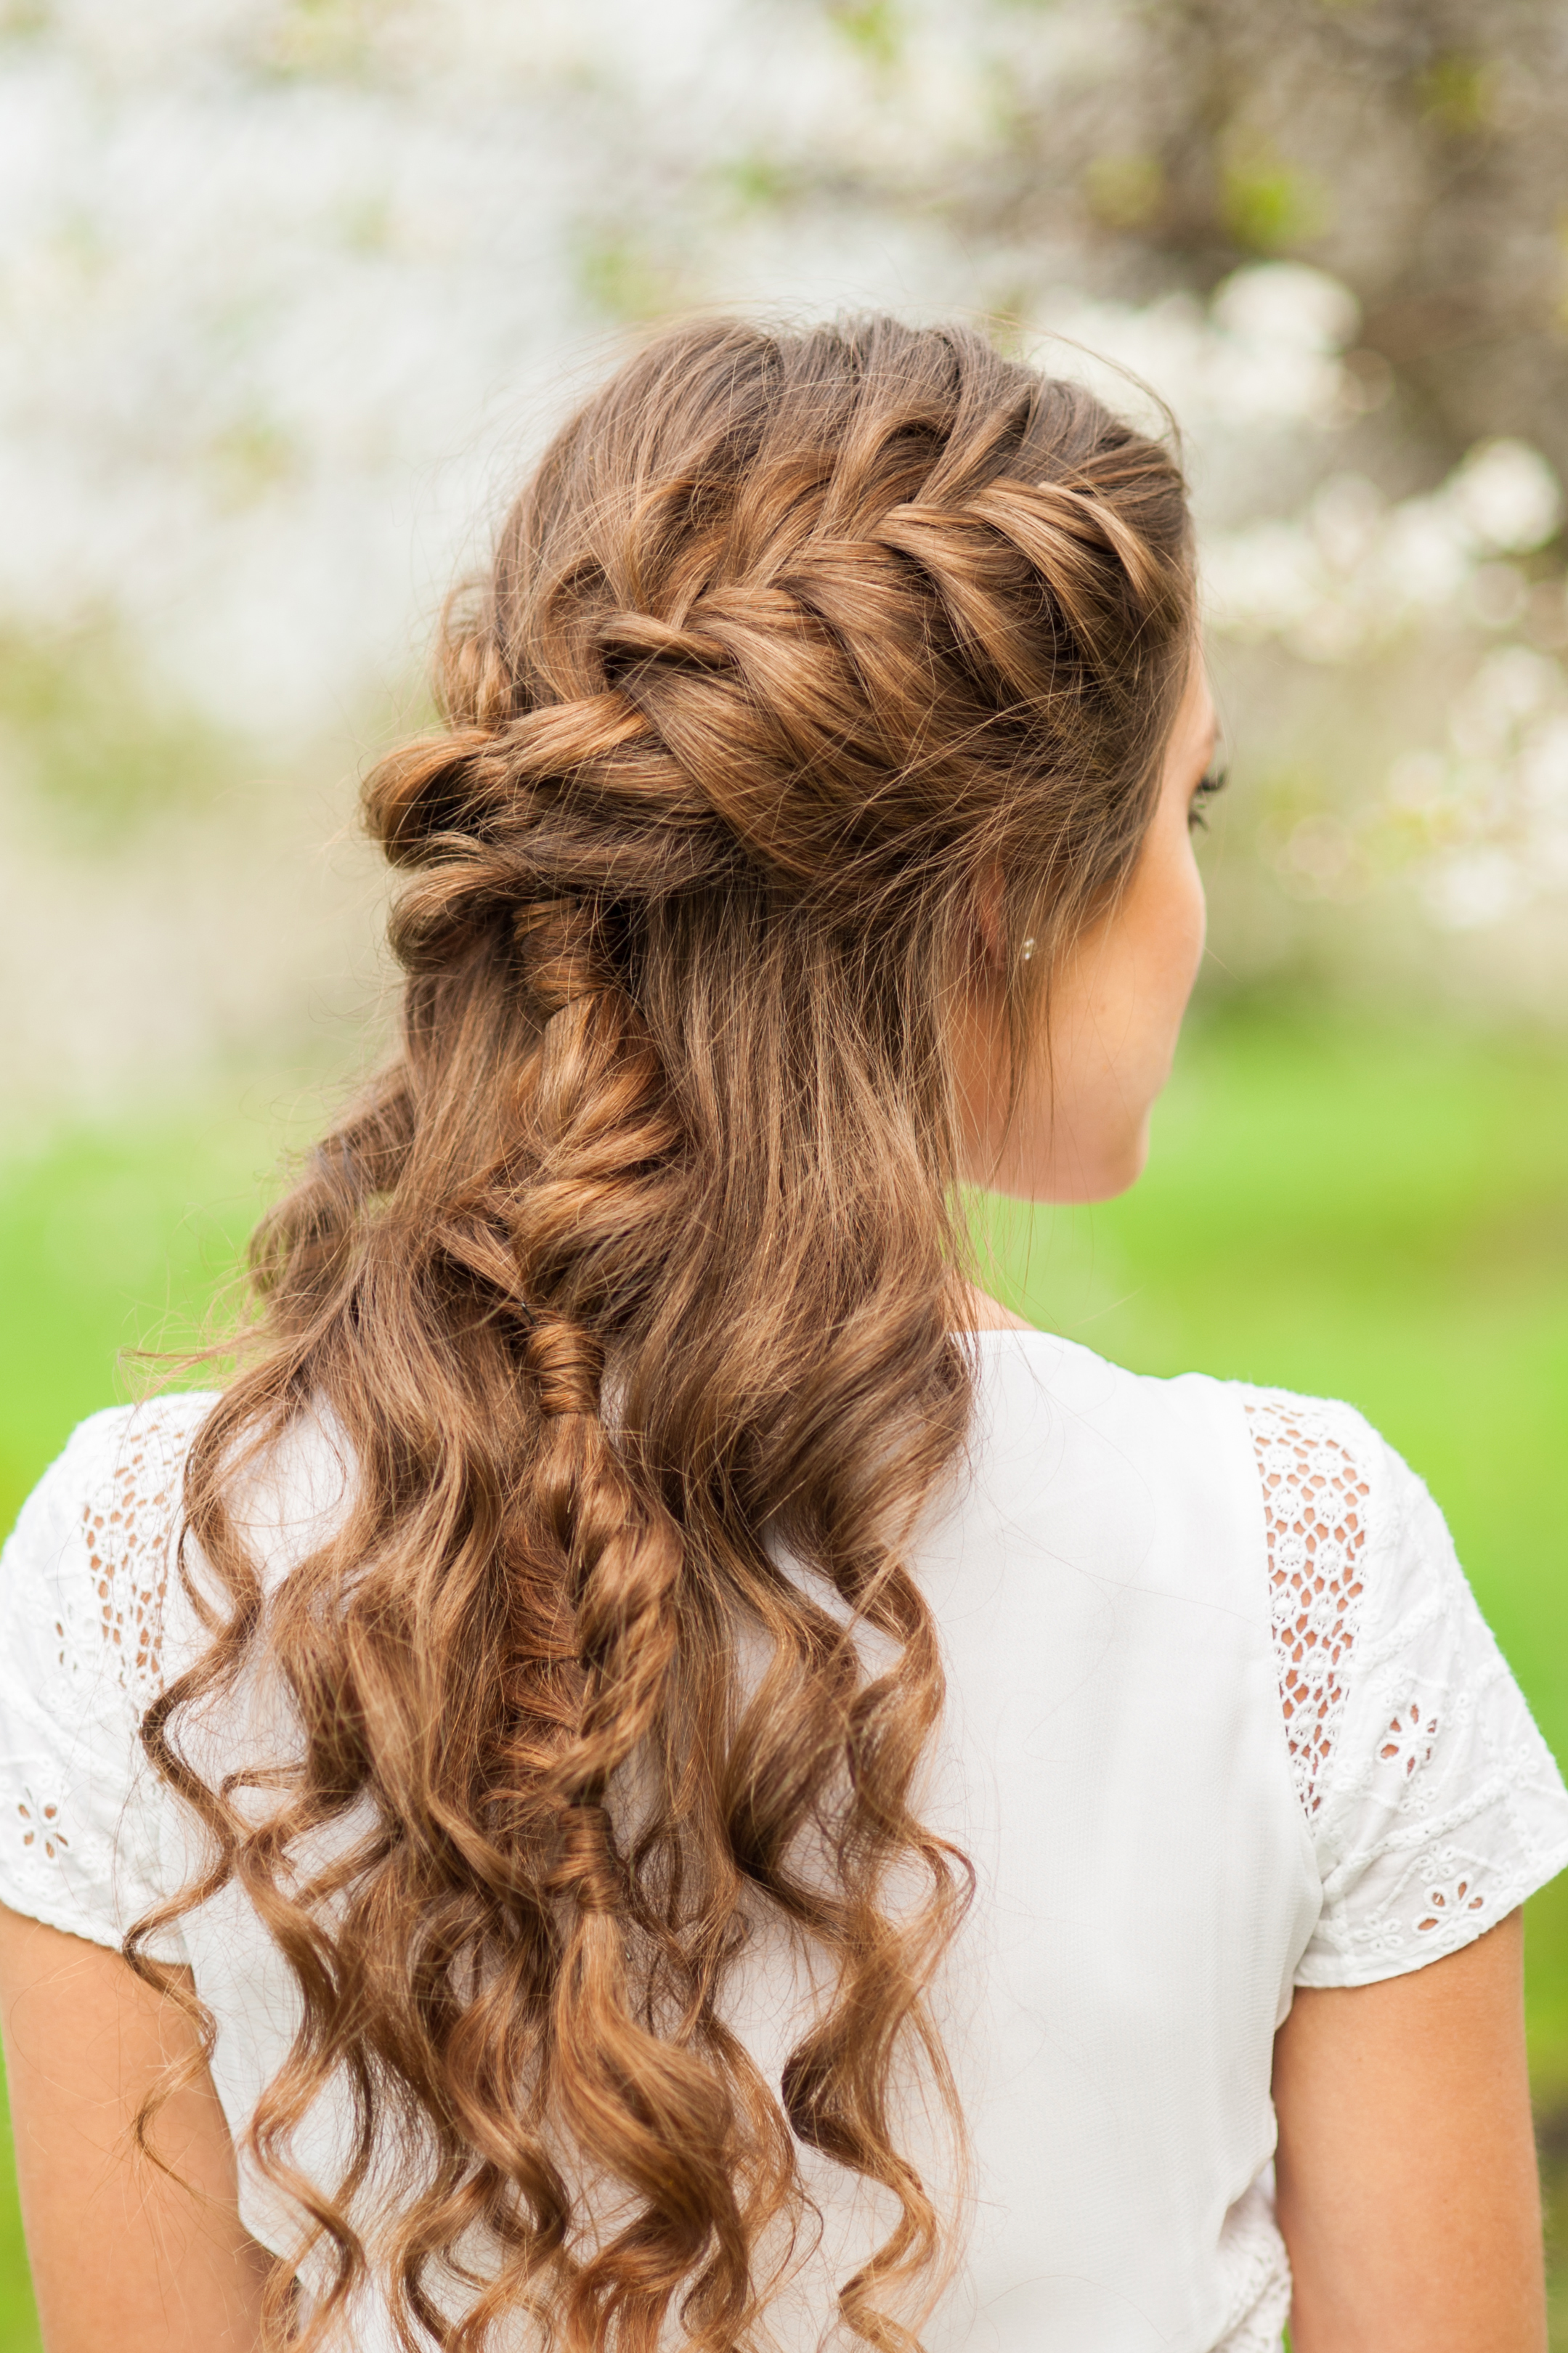 10 Party Hairstyles For The Ultimate Night Out | John Frieda